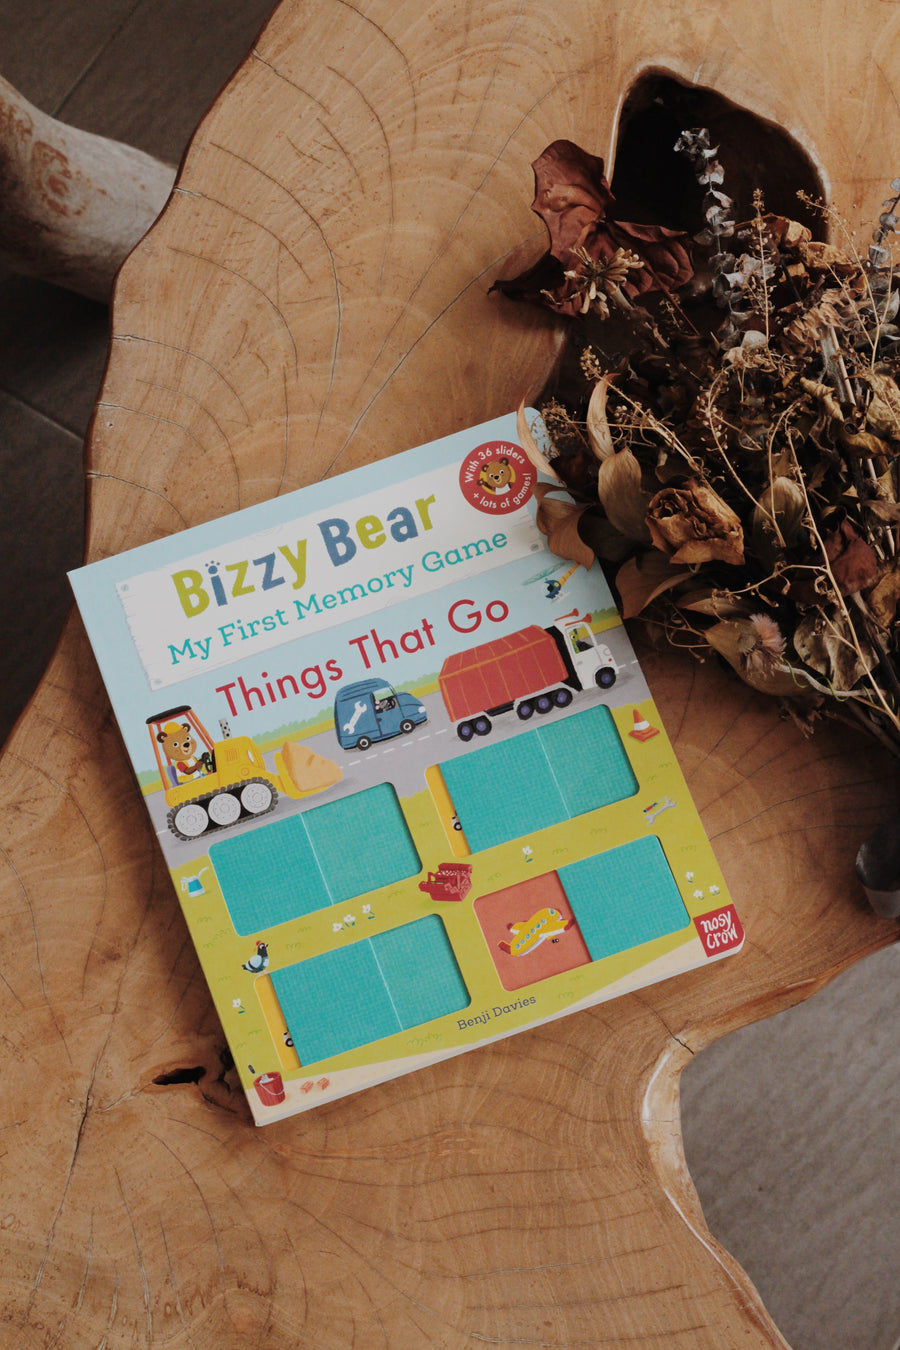 Bizzy Bear: My First Memory Game Books